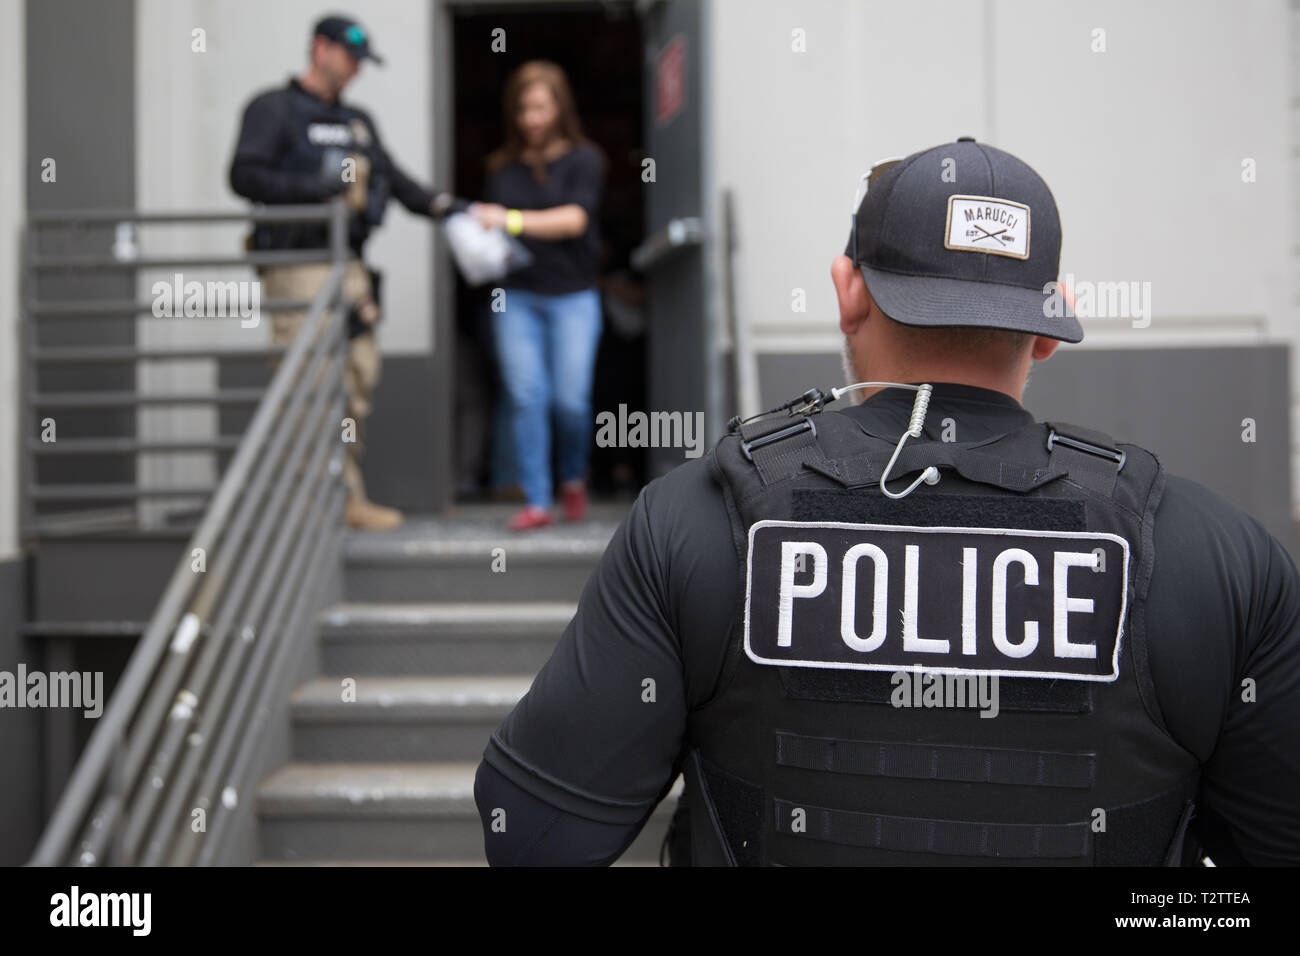 U.S. Immigration and Customs Enforcement agents escort a suspected undocumented immigrant to detention during a raid at CVE Technology Group April 3, 2019 in Allen, Texas. ICE agents arrested 280 employees of the cellphone repair company in the largest worksite operation in more than a decade. Stock Photo